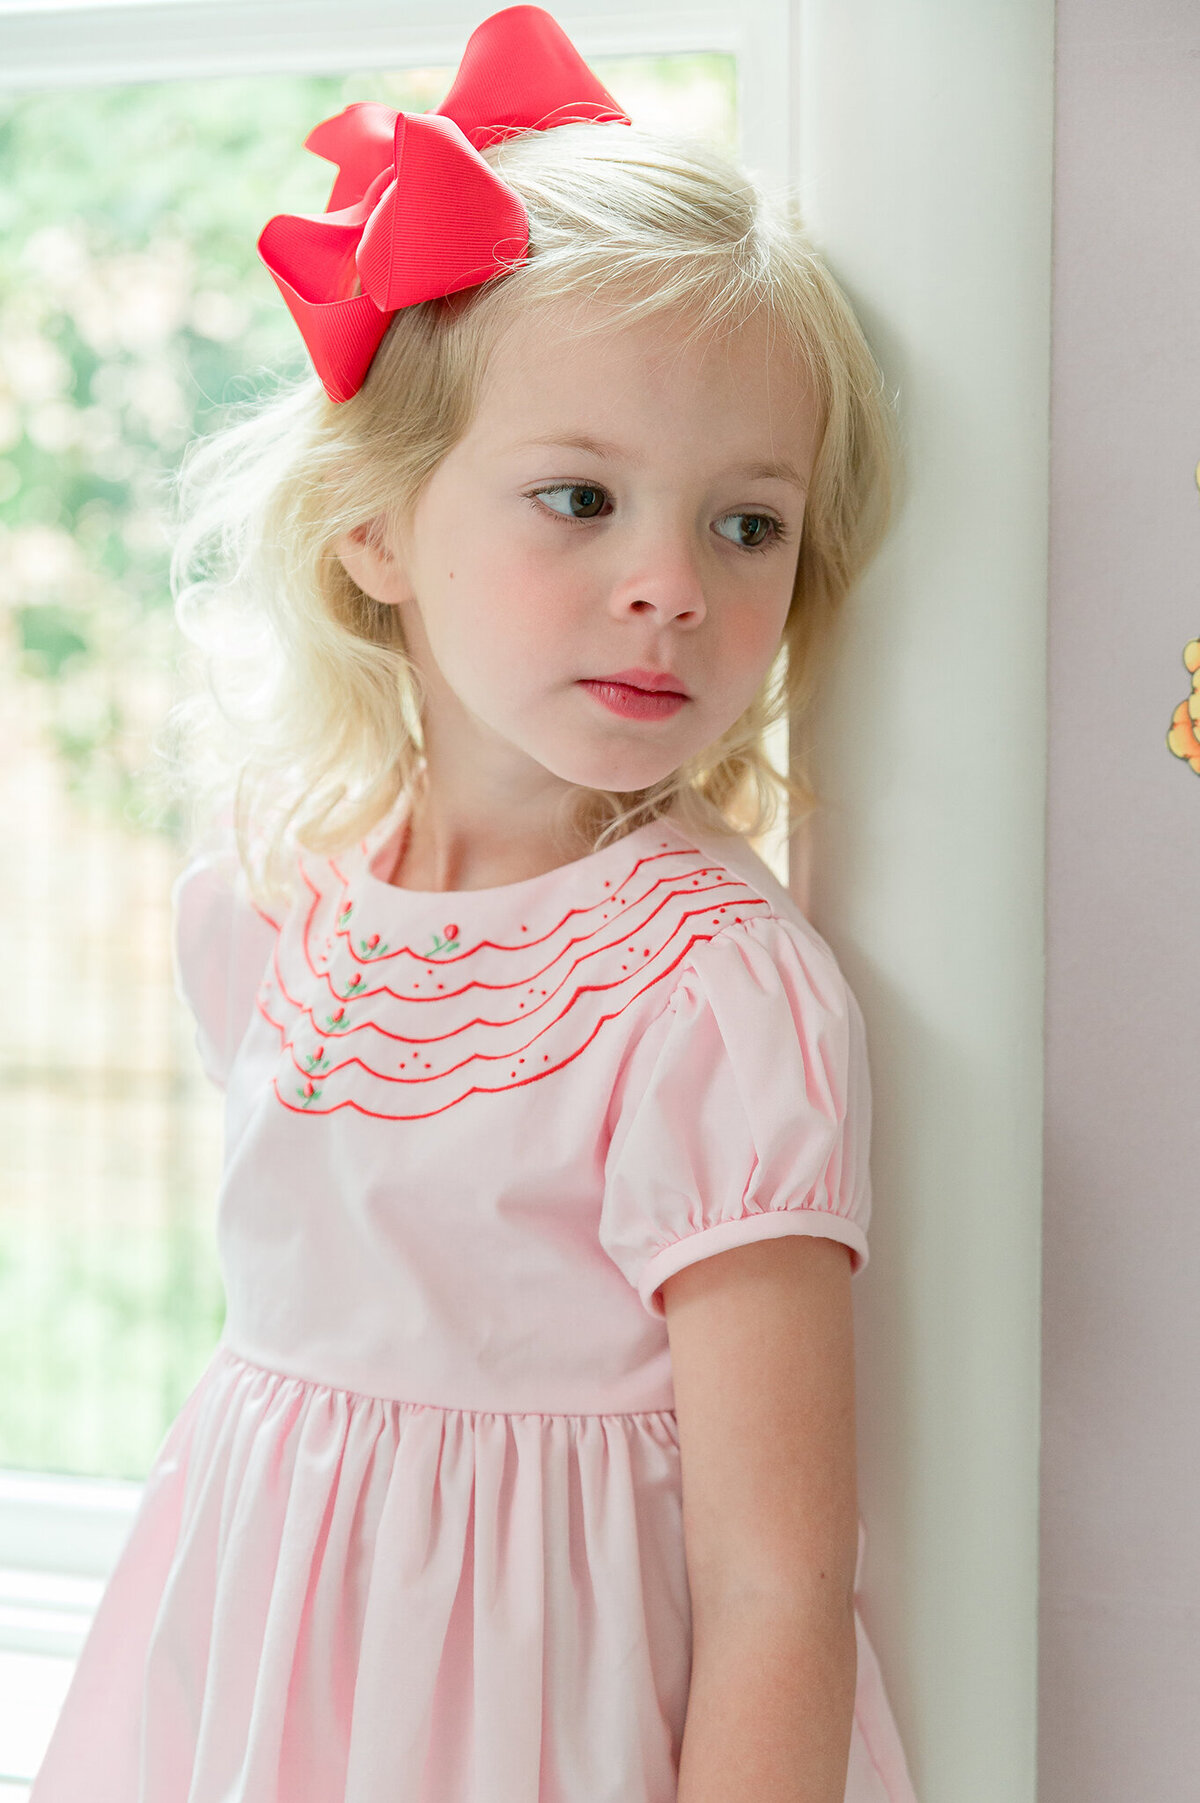 Blonde preschooler leaning up against a window frame gazing into the distance.